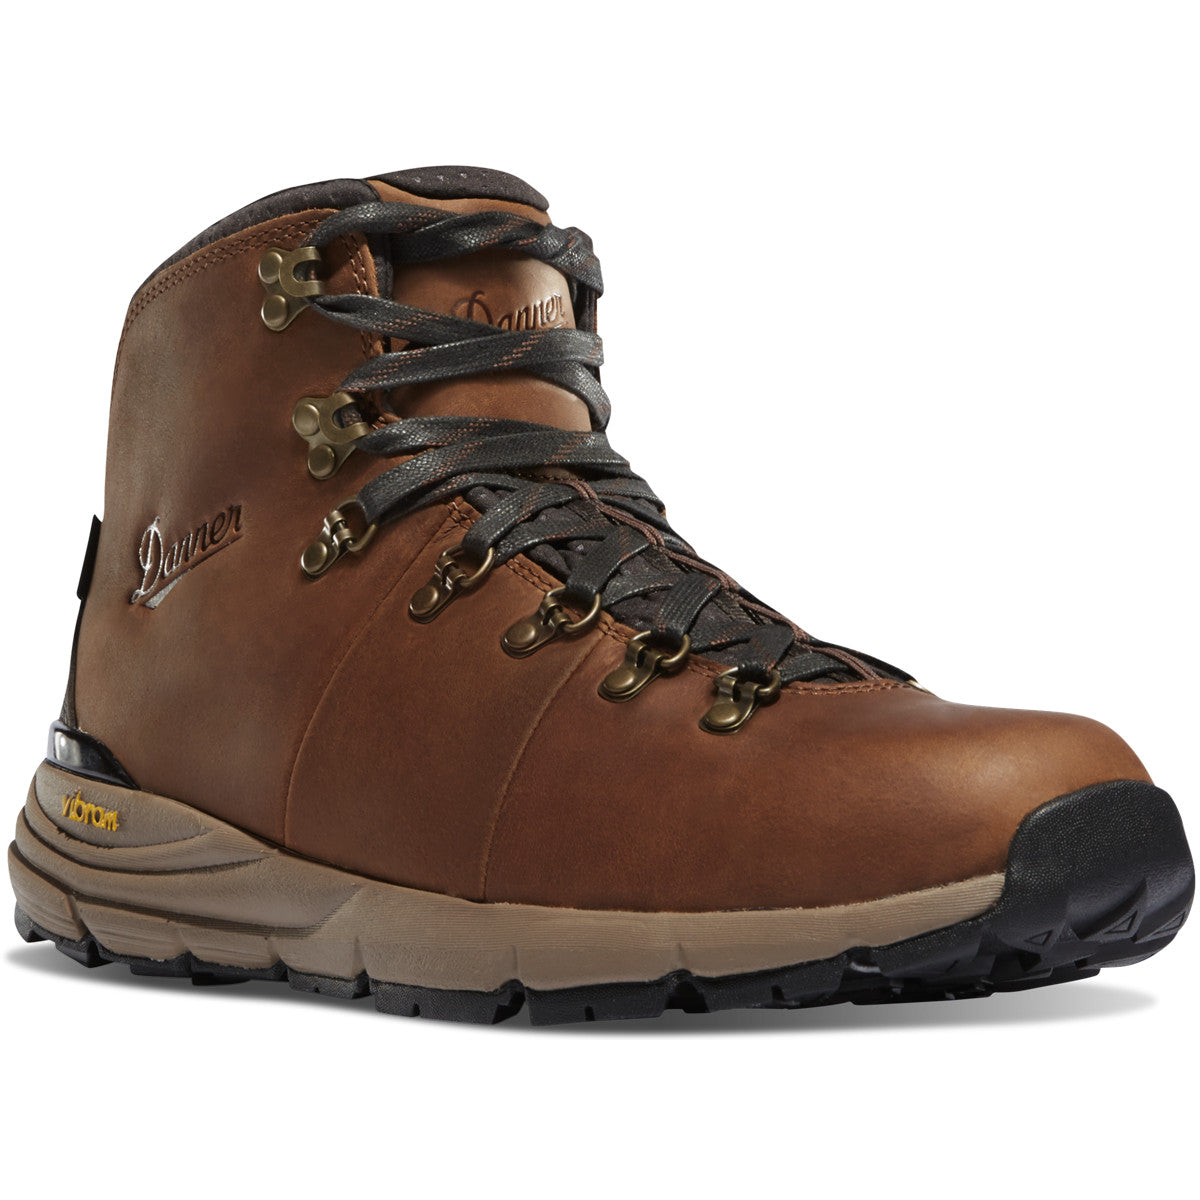 a photo of the Danner Mountain 600 in brown with red laces